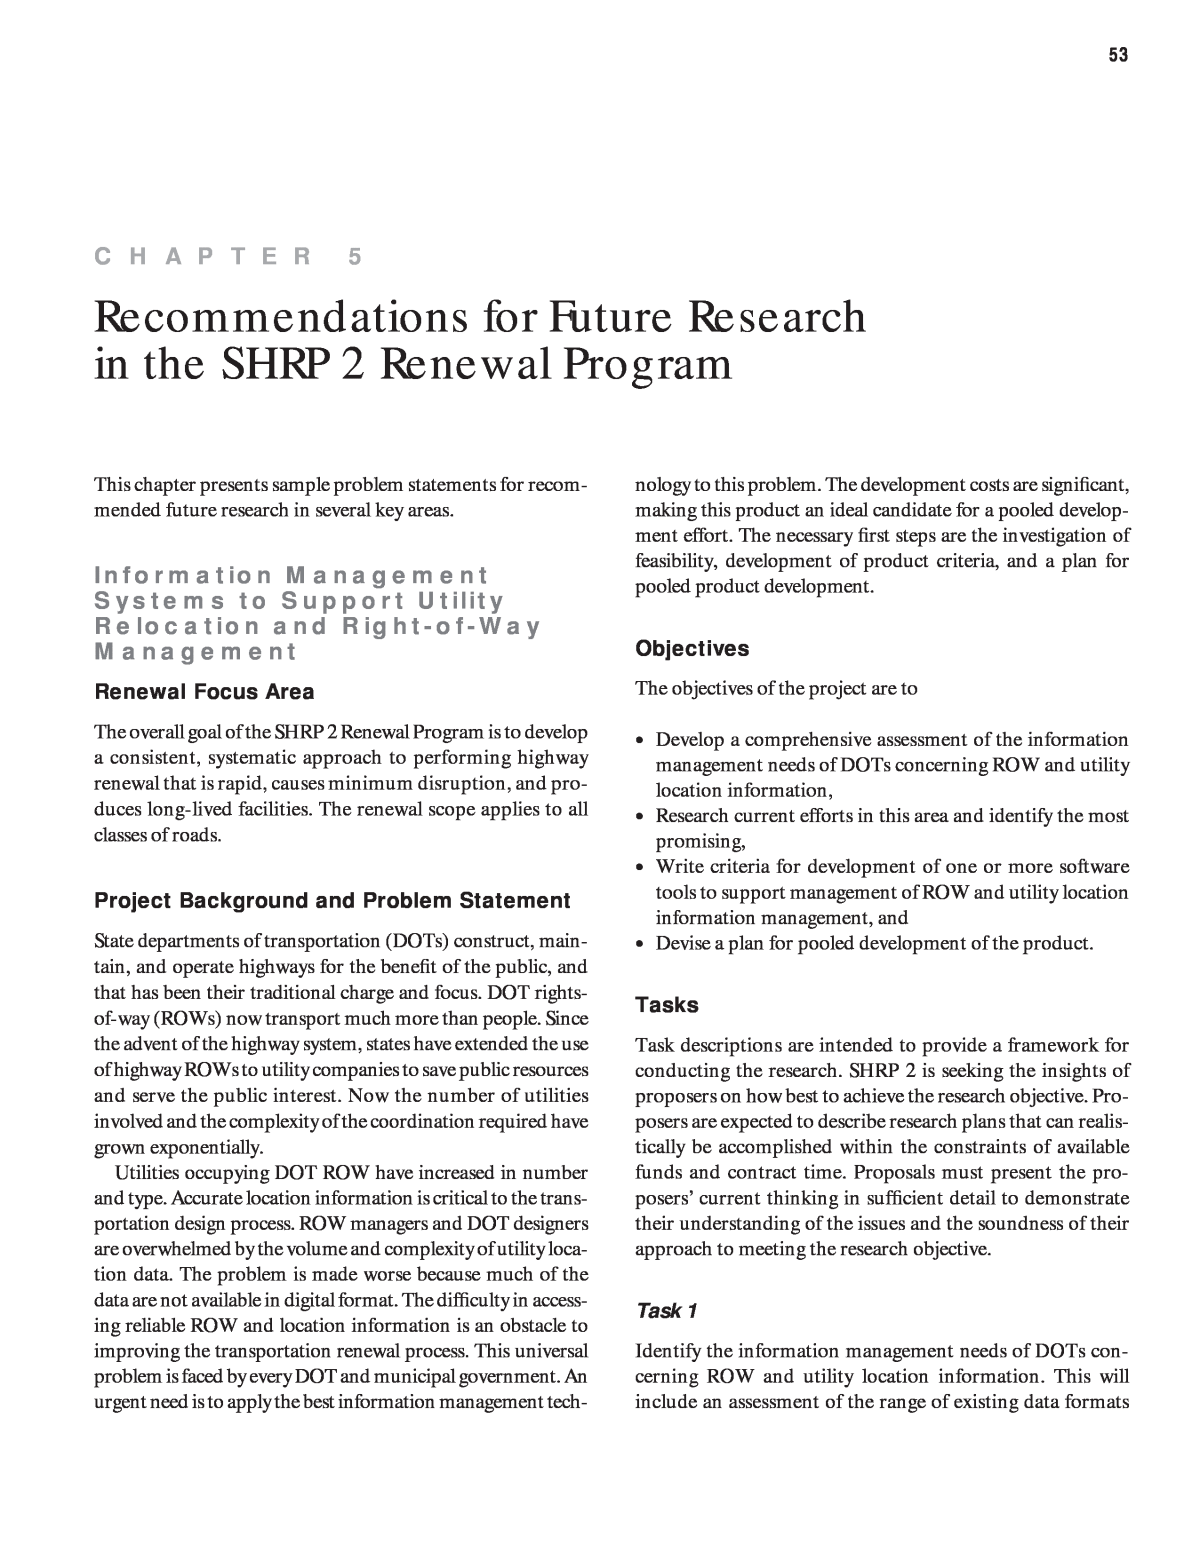 recommendations for future research priorities